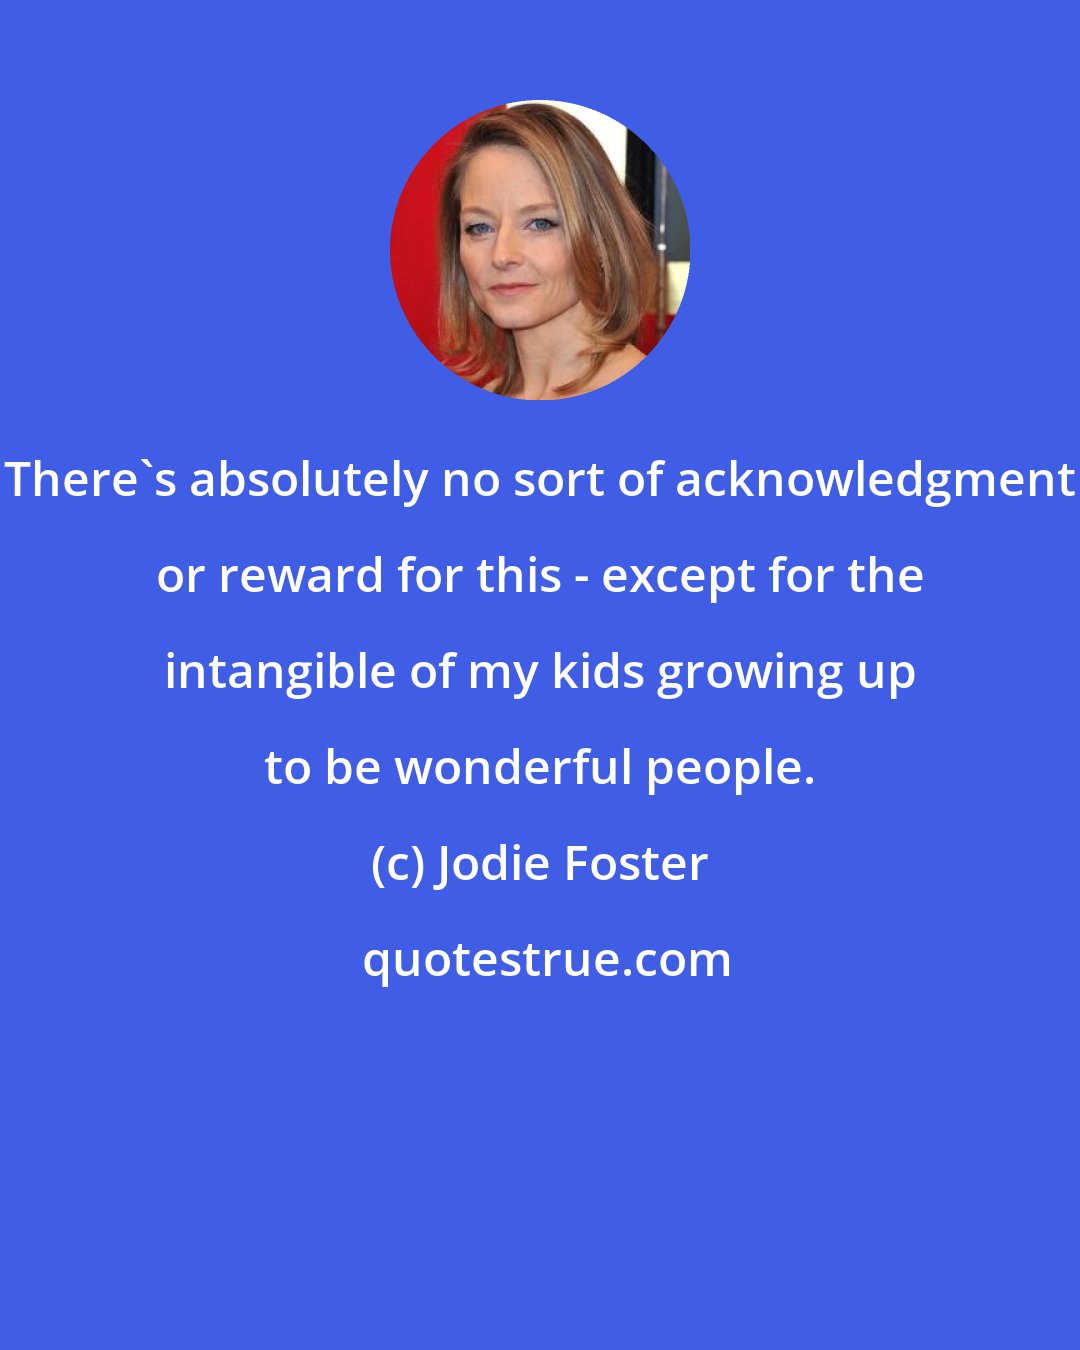 Jodie Foster: There's absolutely no sort of acknowledgment or reward for this - except for the intangible of my kids growing up to be wonderful people.